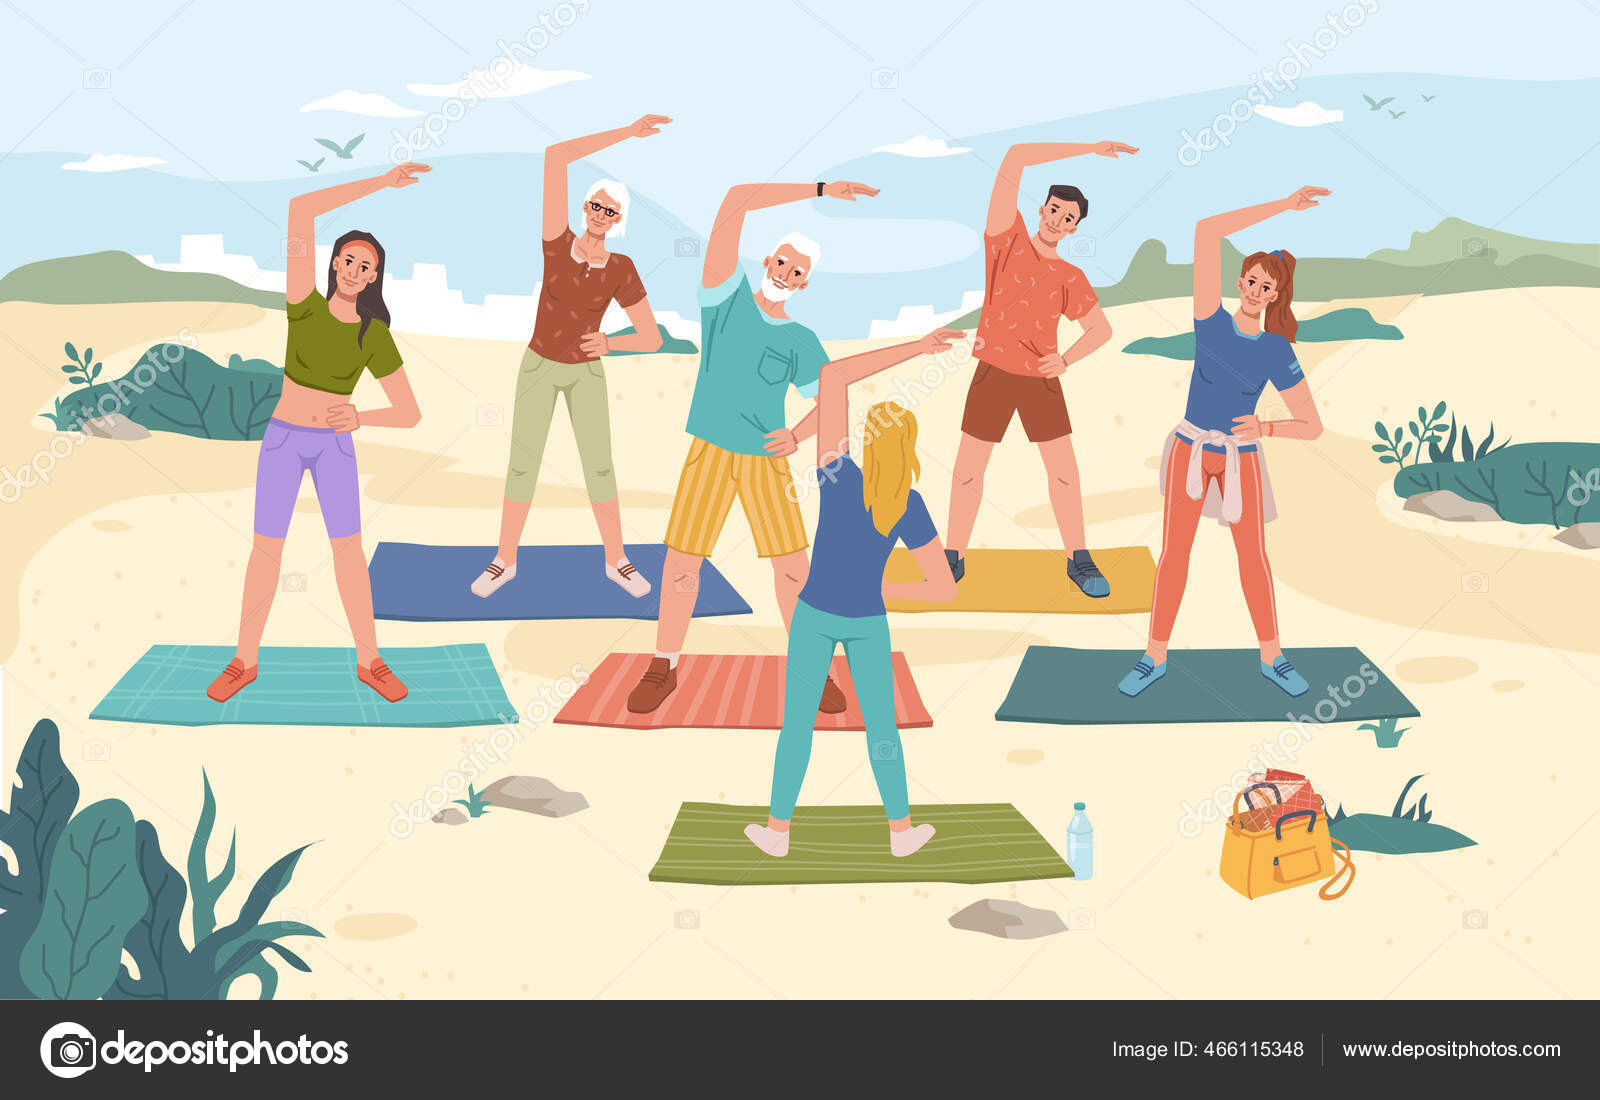 People doing physical activity outdoors men Vector Image